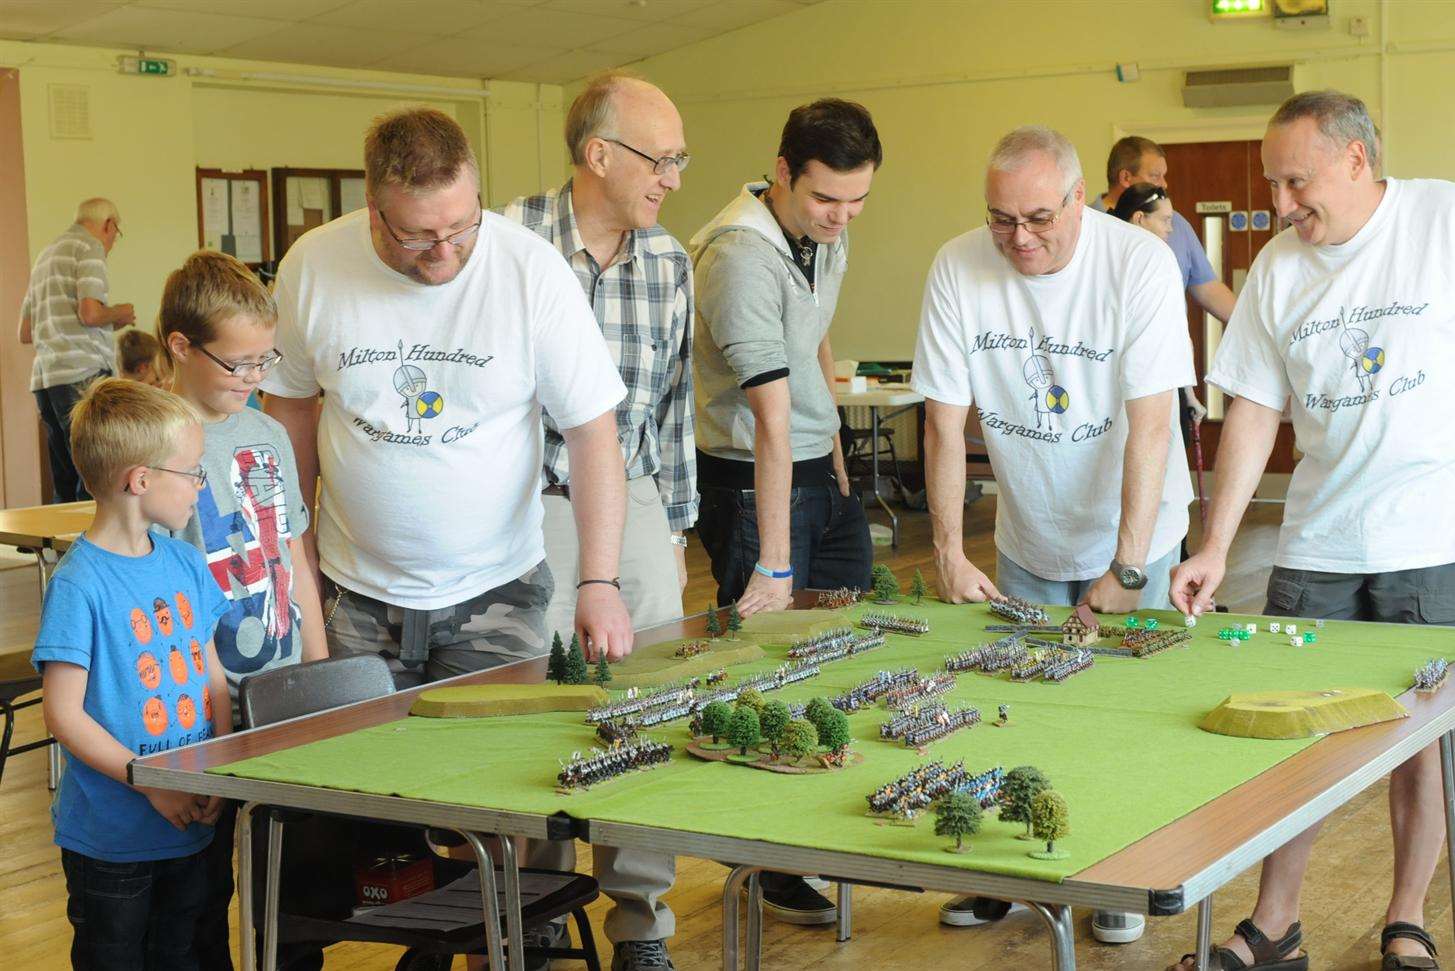 Milton Hundreds Wargames club open day at Iwade village hall. Chairman Alan Abbey is on the left